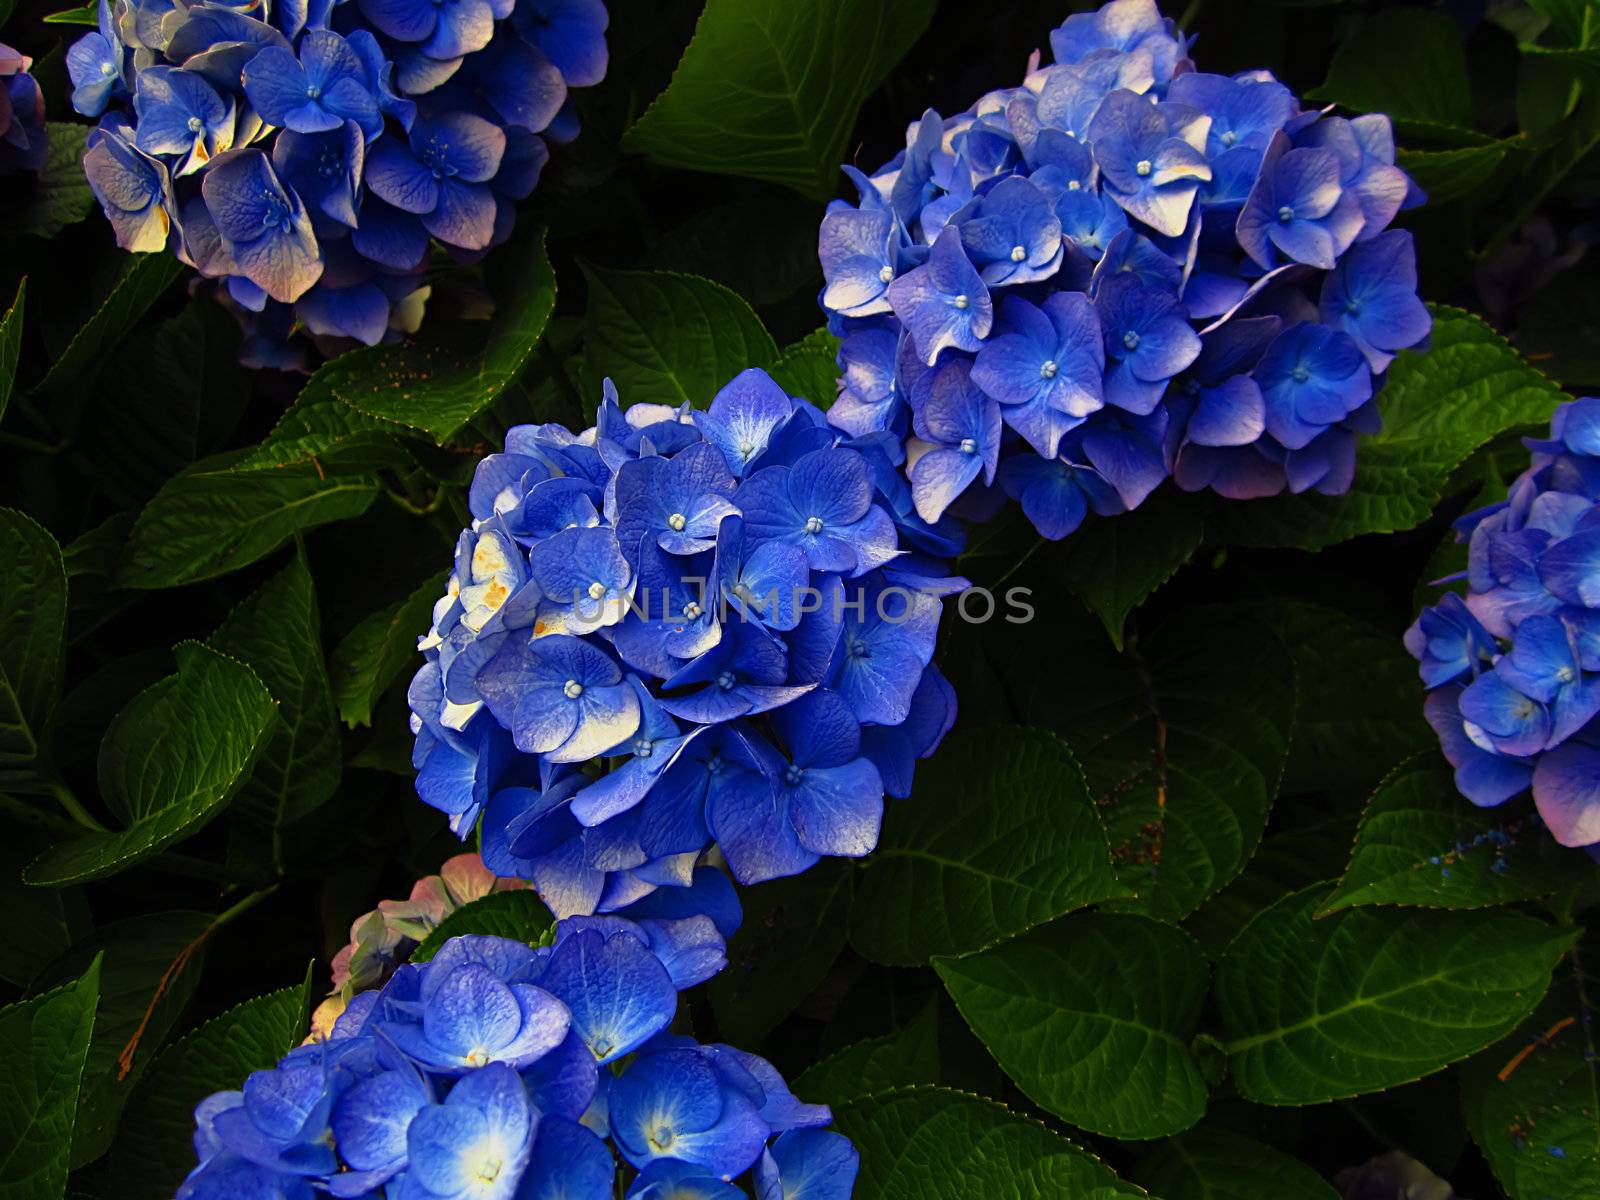 Bigleaf Hydrangea (Latin Name: Hydrangea macrophylla) is native to Japan but is cultivated in many parts of the world. Its blossoms may be pink, blue, or purple.